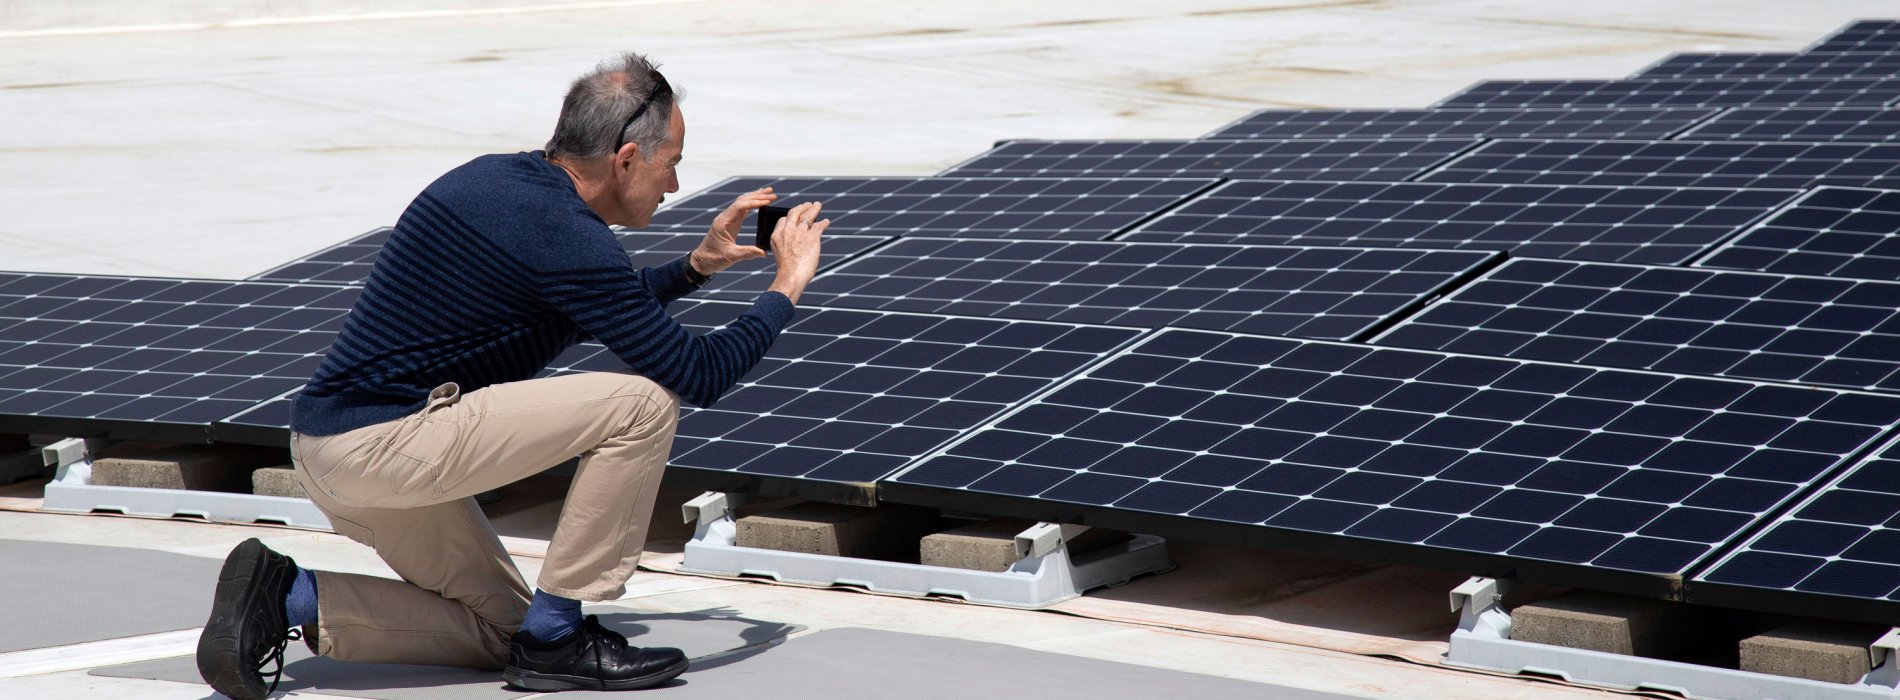 A professor kneels down to take a photo with his smartphone of a solar panel array